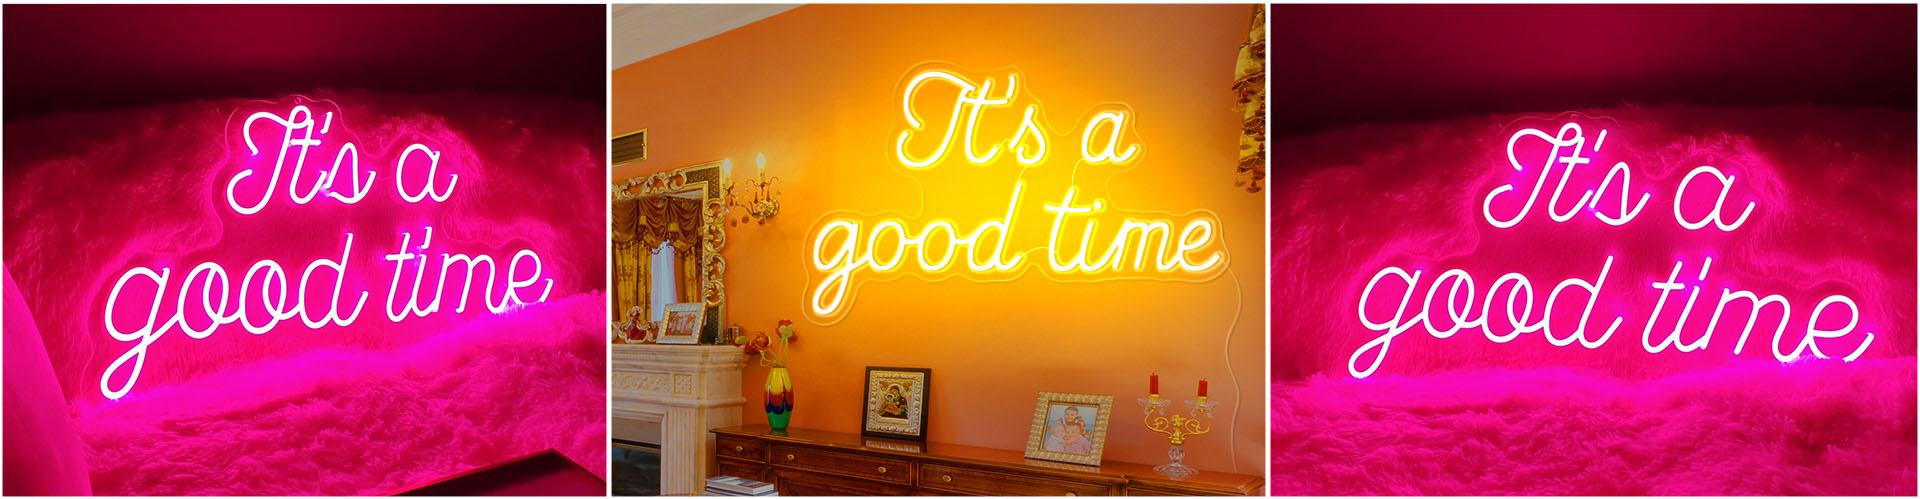 it's a good time neon sign